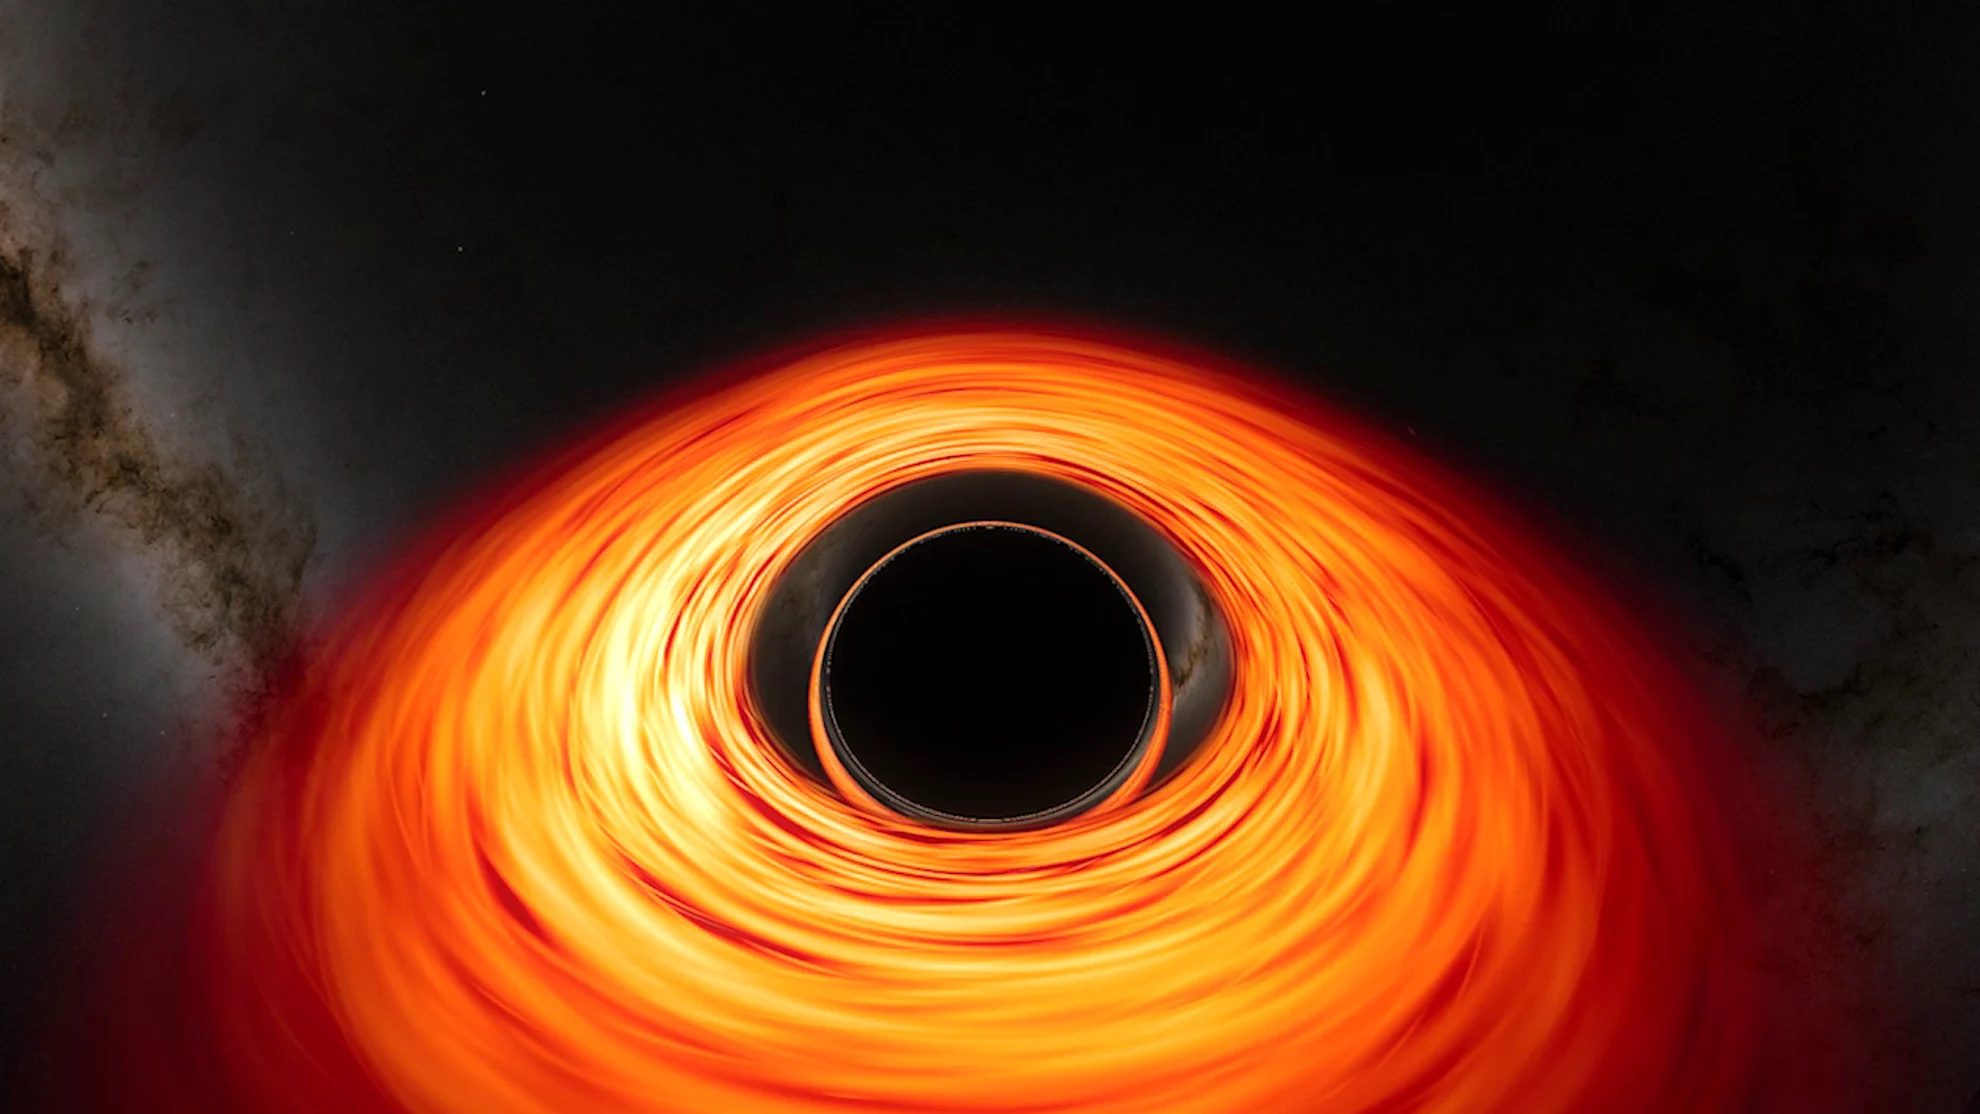 Ever wonder what it's like to dive into a black hole? Take a mind-bending plunge into this supermassive void